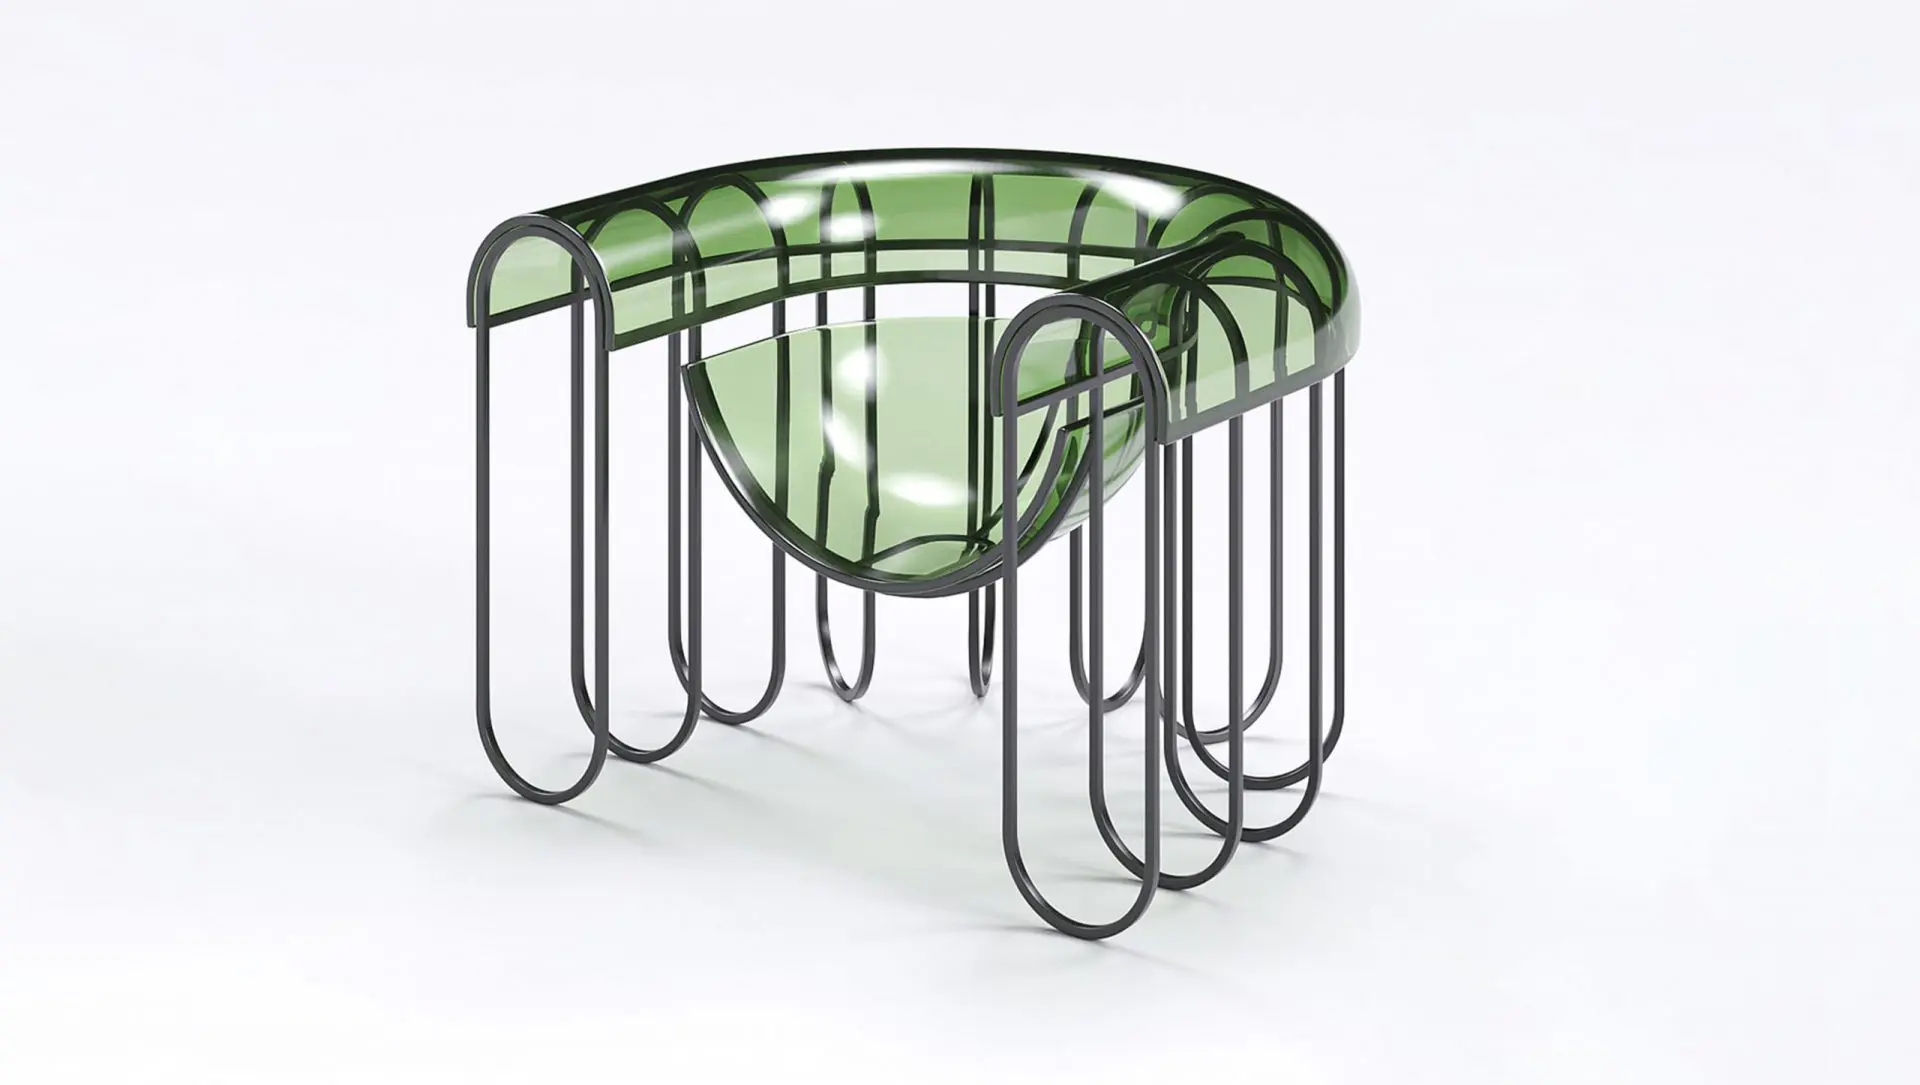 Romulo Temigue - Boia chair